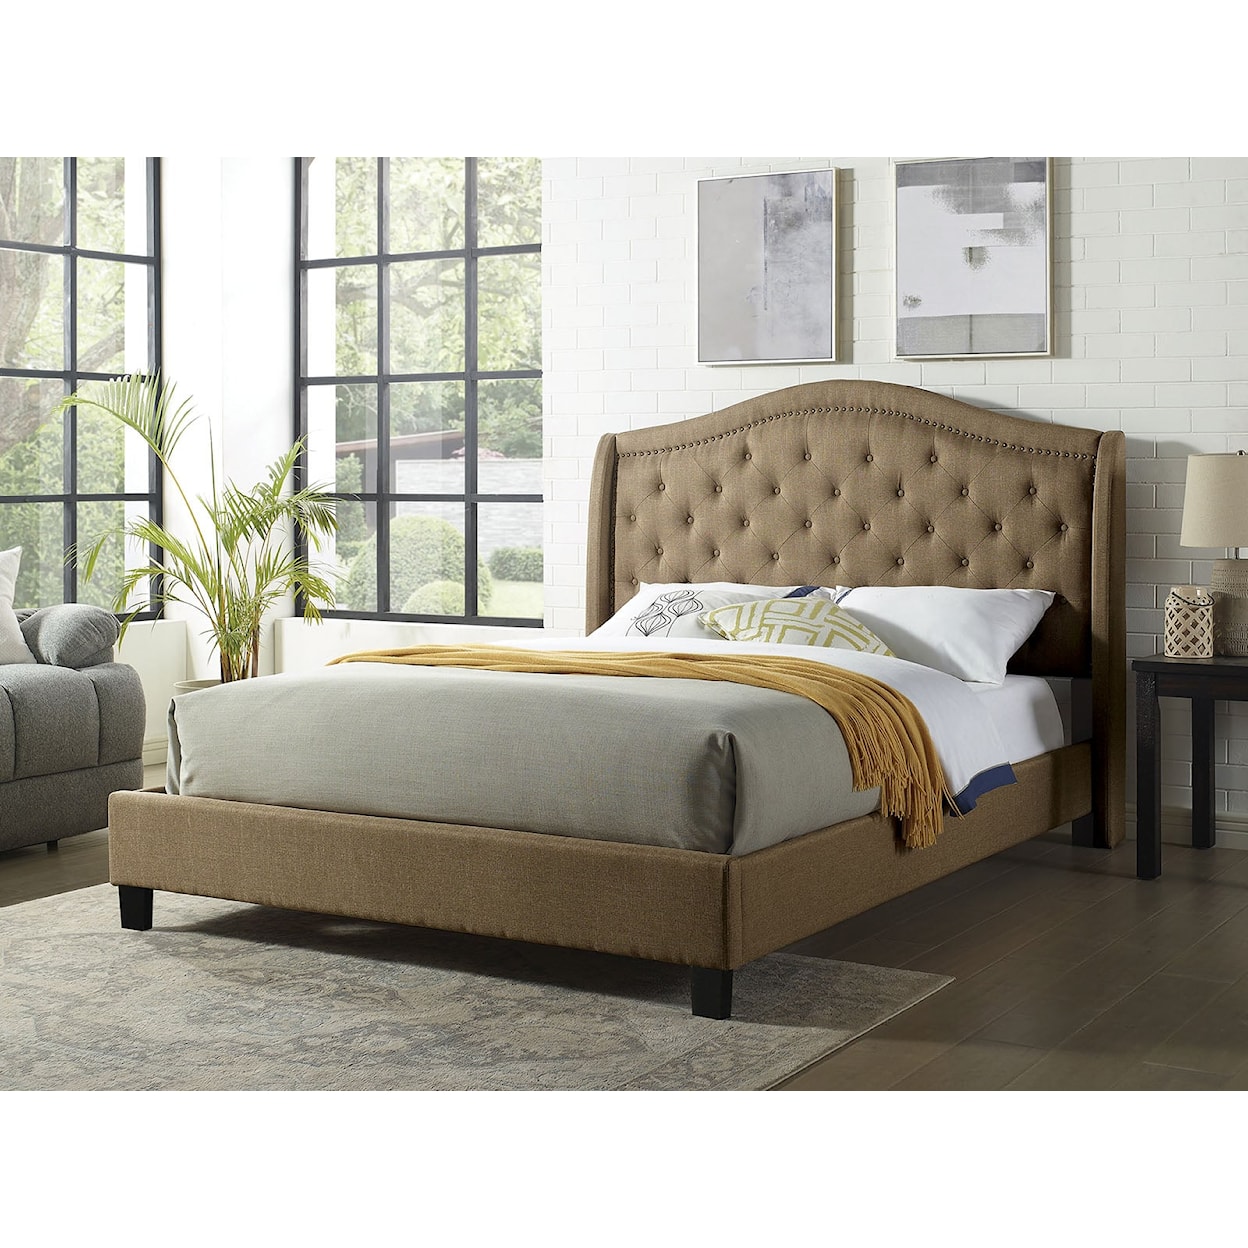 Furniture of America Carly E.King Bed, Brown